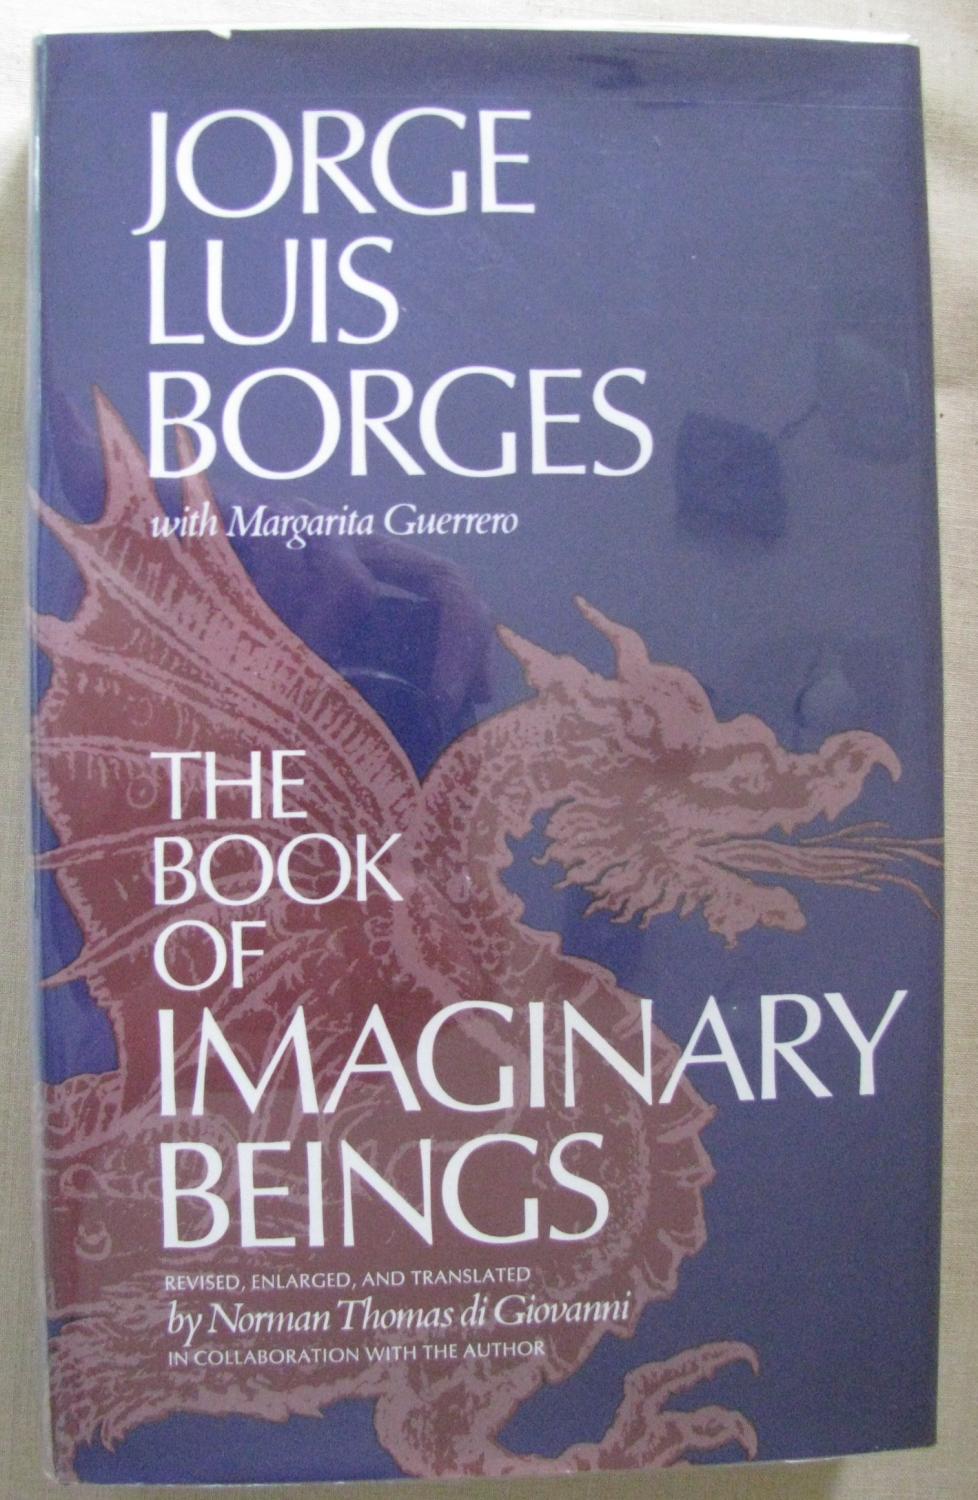 Book of Imaginary Beings - Borges, Jorge Luis